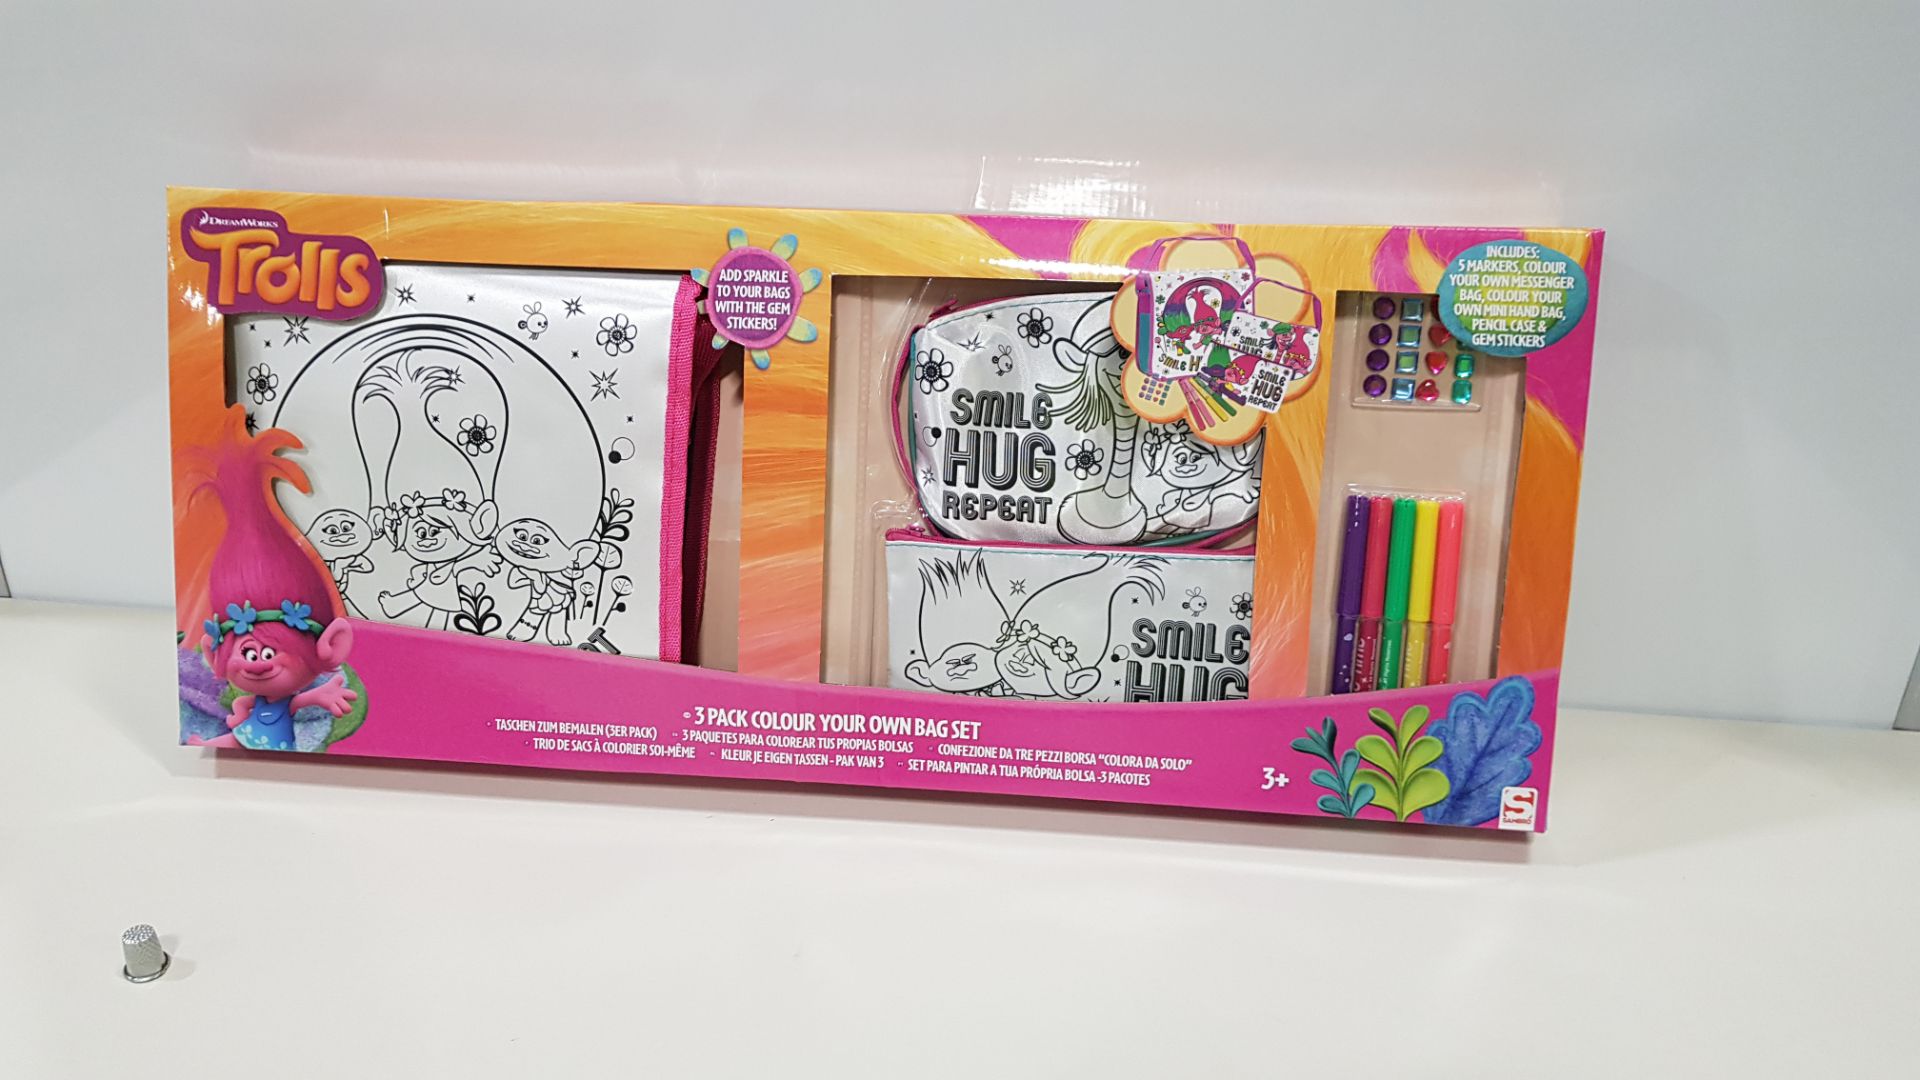 30 X BRAND NEW NICKELODEON TROLLS SET OF 3 COLOUR YOUR OWN BAGS INCLUDES MARKERS, YOUR OWN BAG, HAND